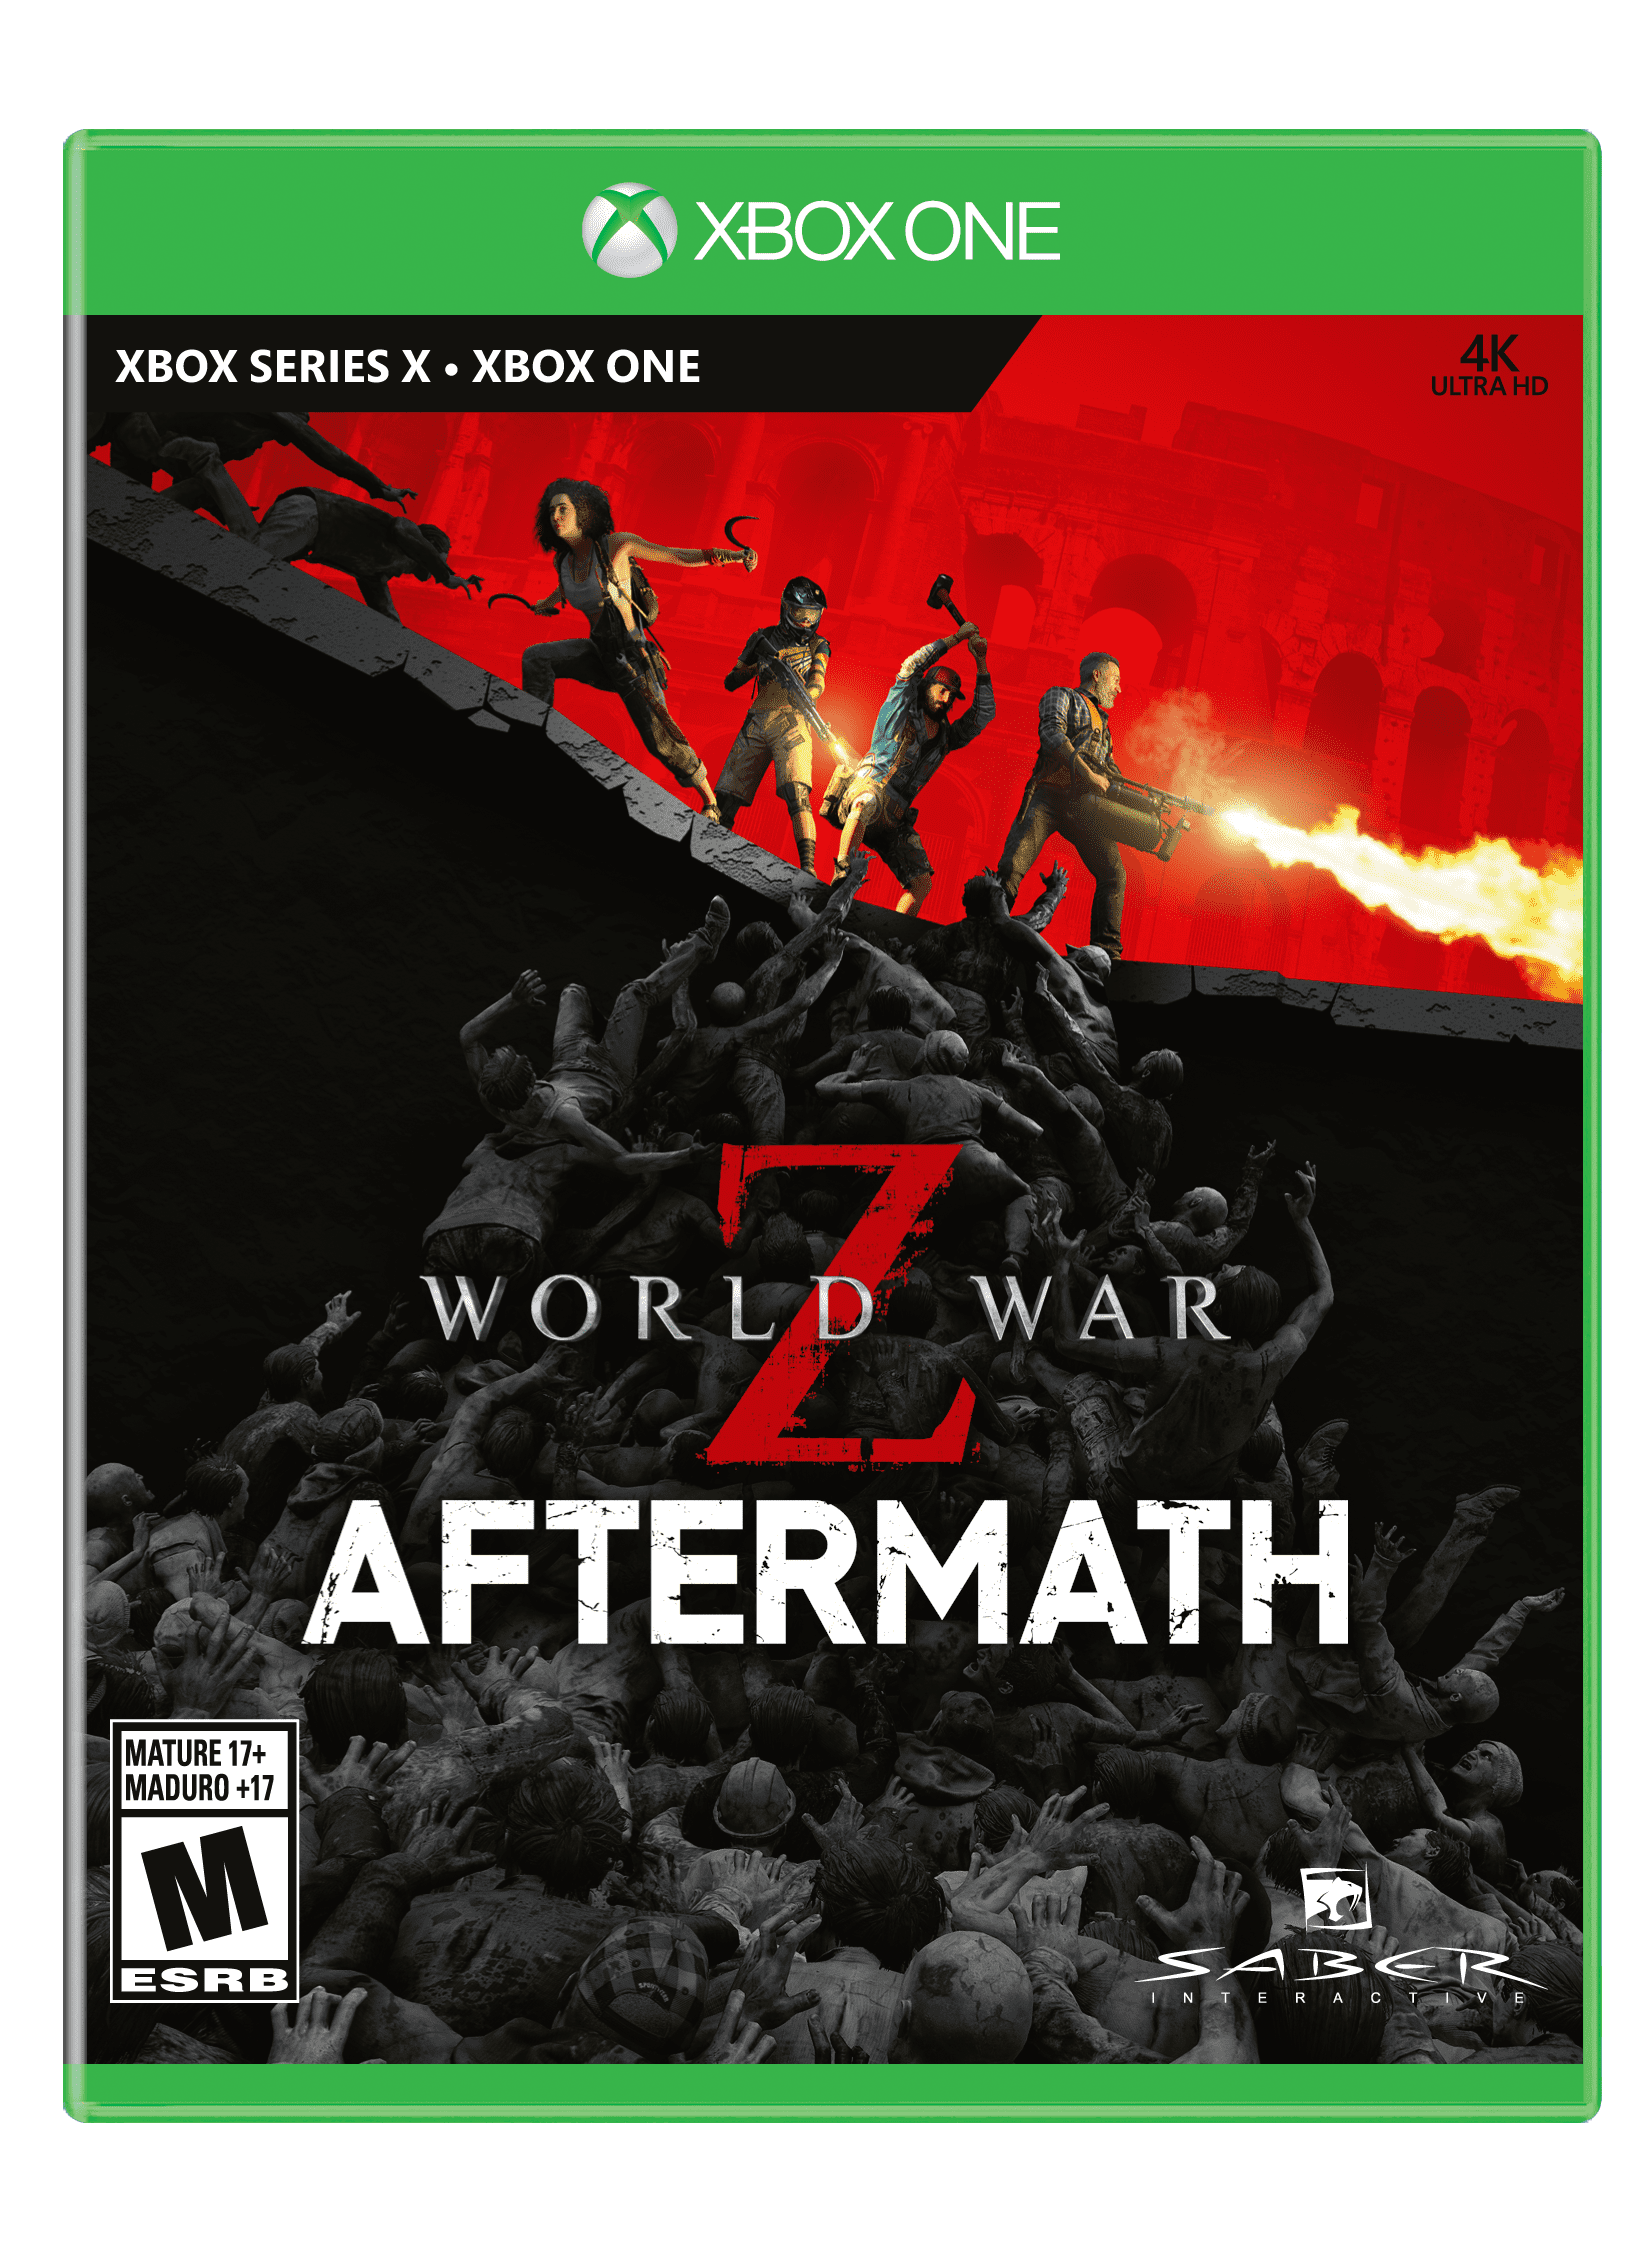 Saber Interactive - Great news for Xbox Game Pass owners! World War Z is  coming to Xbox Game Pass for PC on September 3. See you in the game!